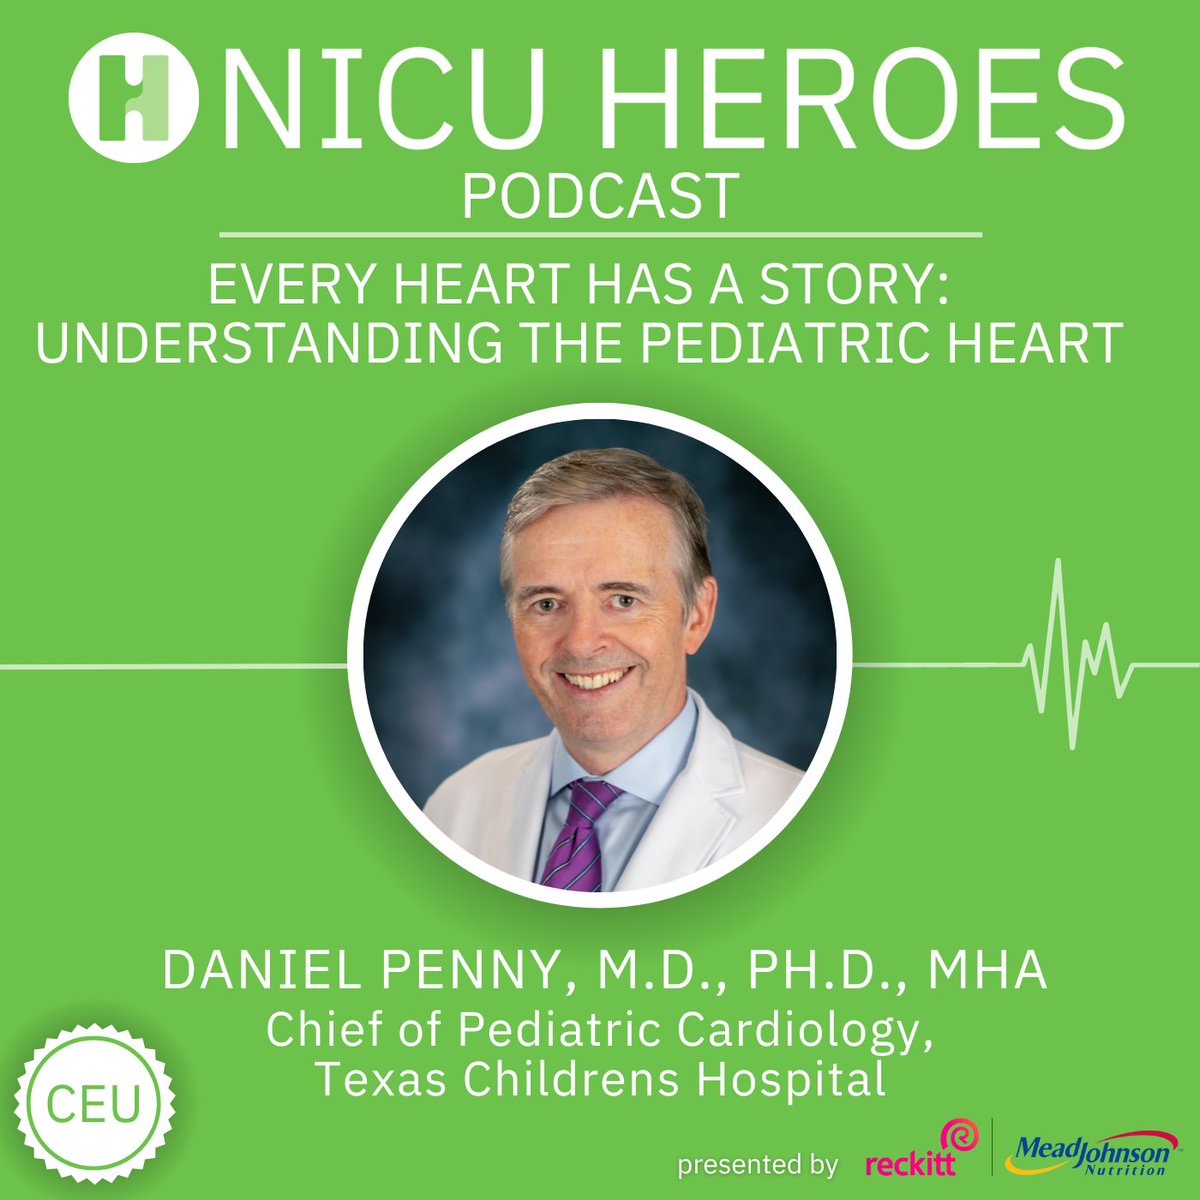 The #NICU Heroes #podcast is back! Our first episode of the season is all about understanding the pediatric heart & why neonates are more susceptible to congenital heart defects. Listen wherever you get your podcasts! This episode is eligible for one CEU. handtohold.org/NICUheroes